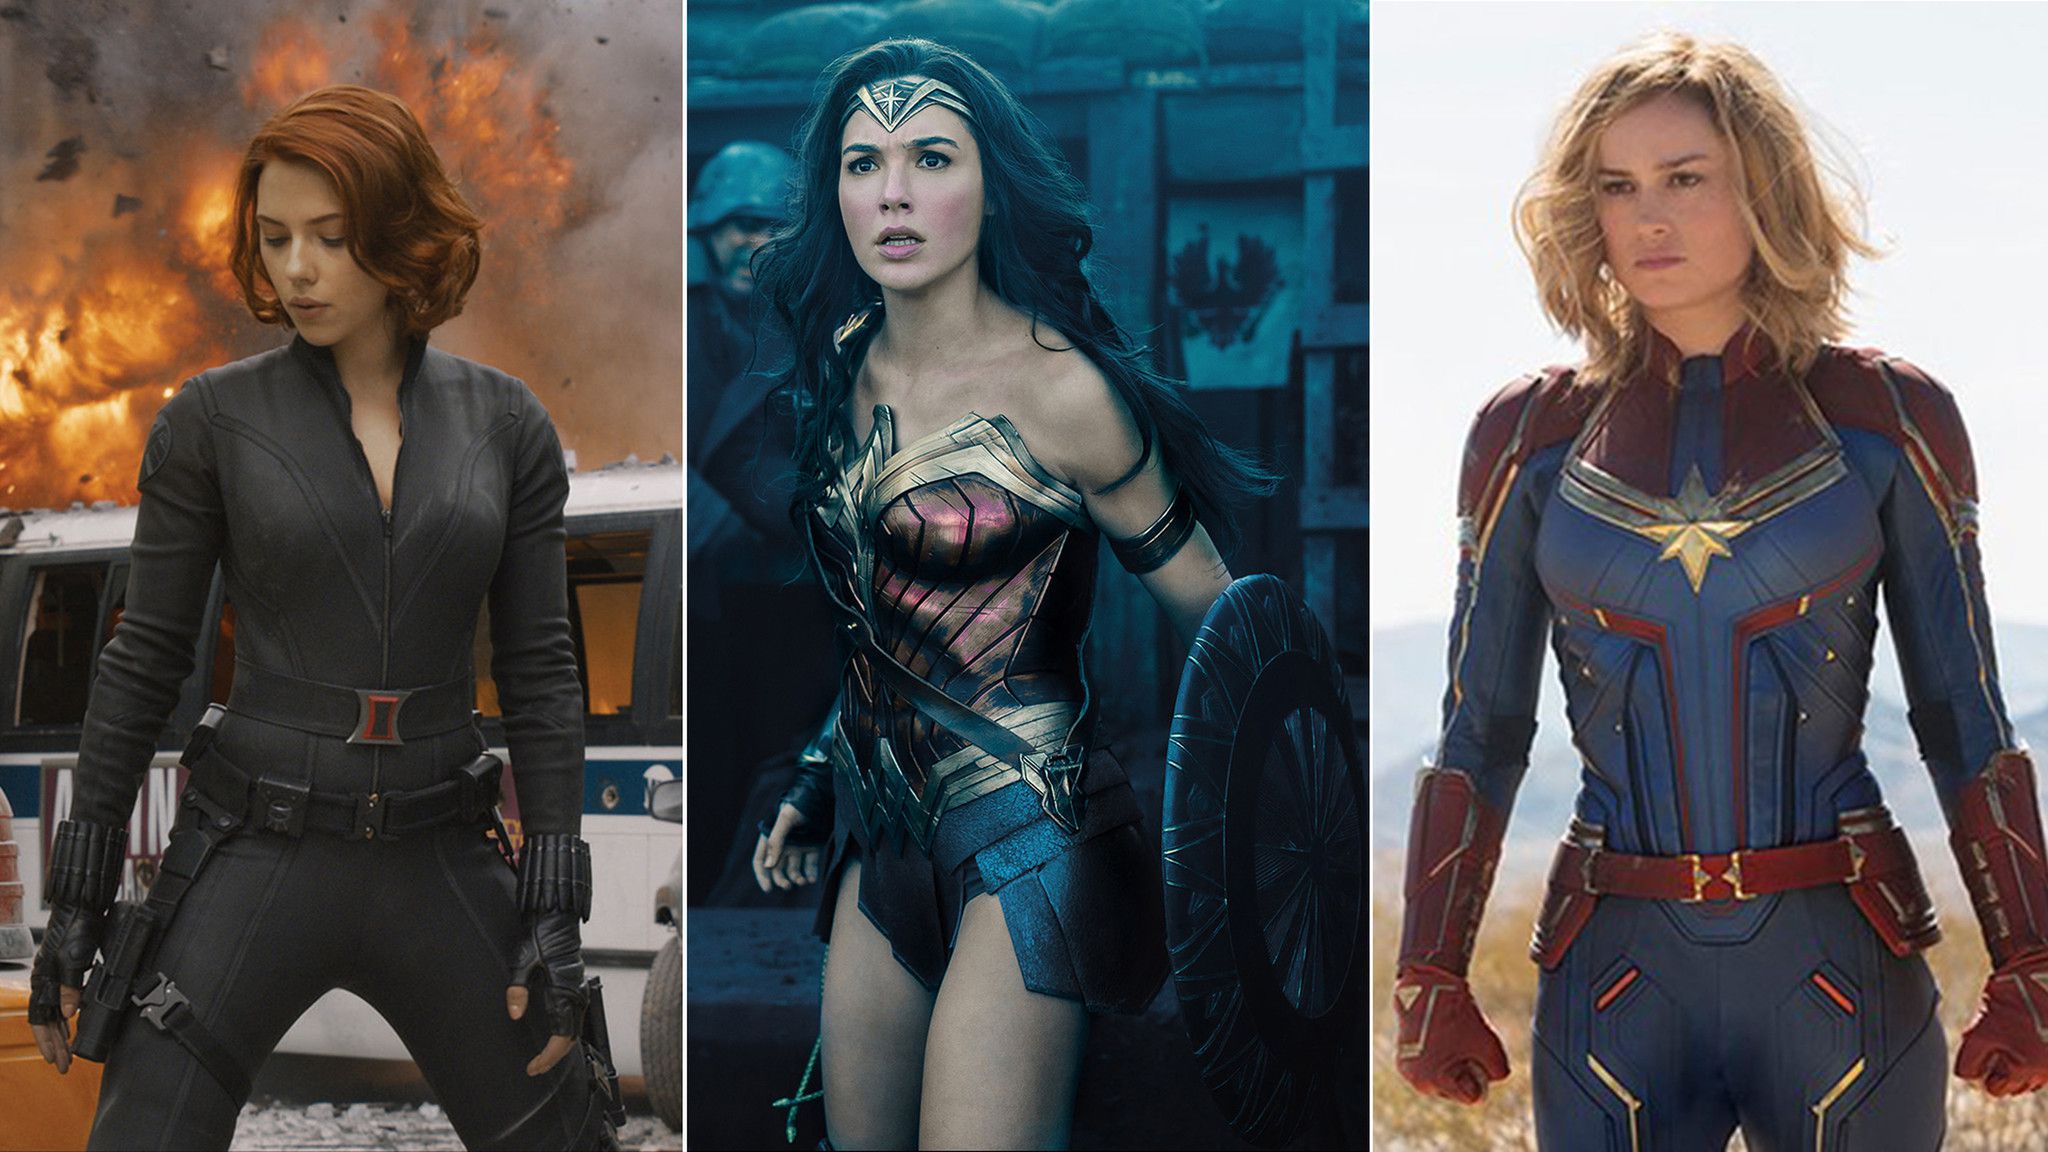 What Students Are Saying About: Female Superheroes, Being Left Out